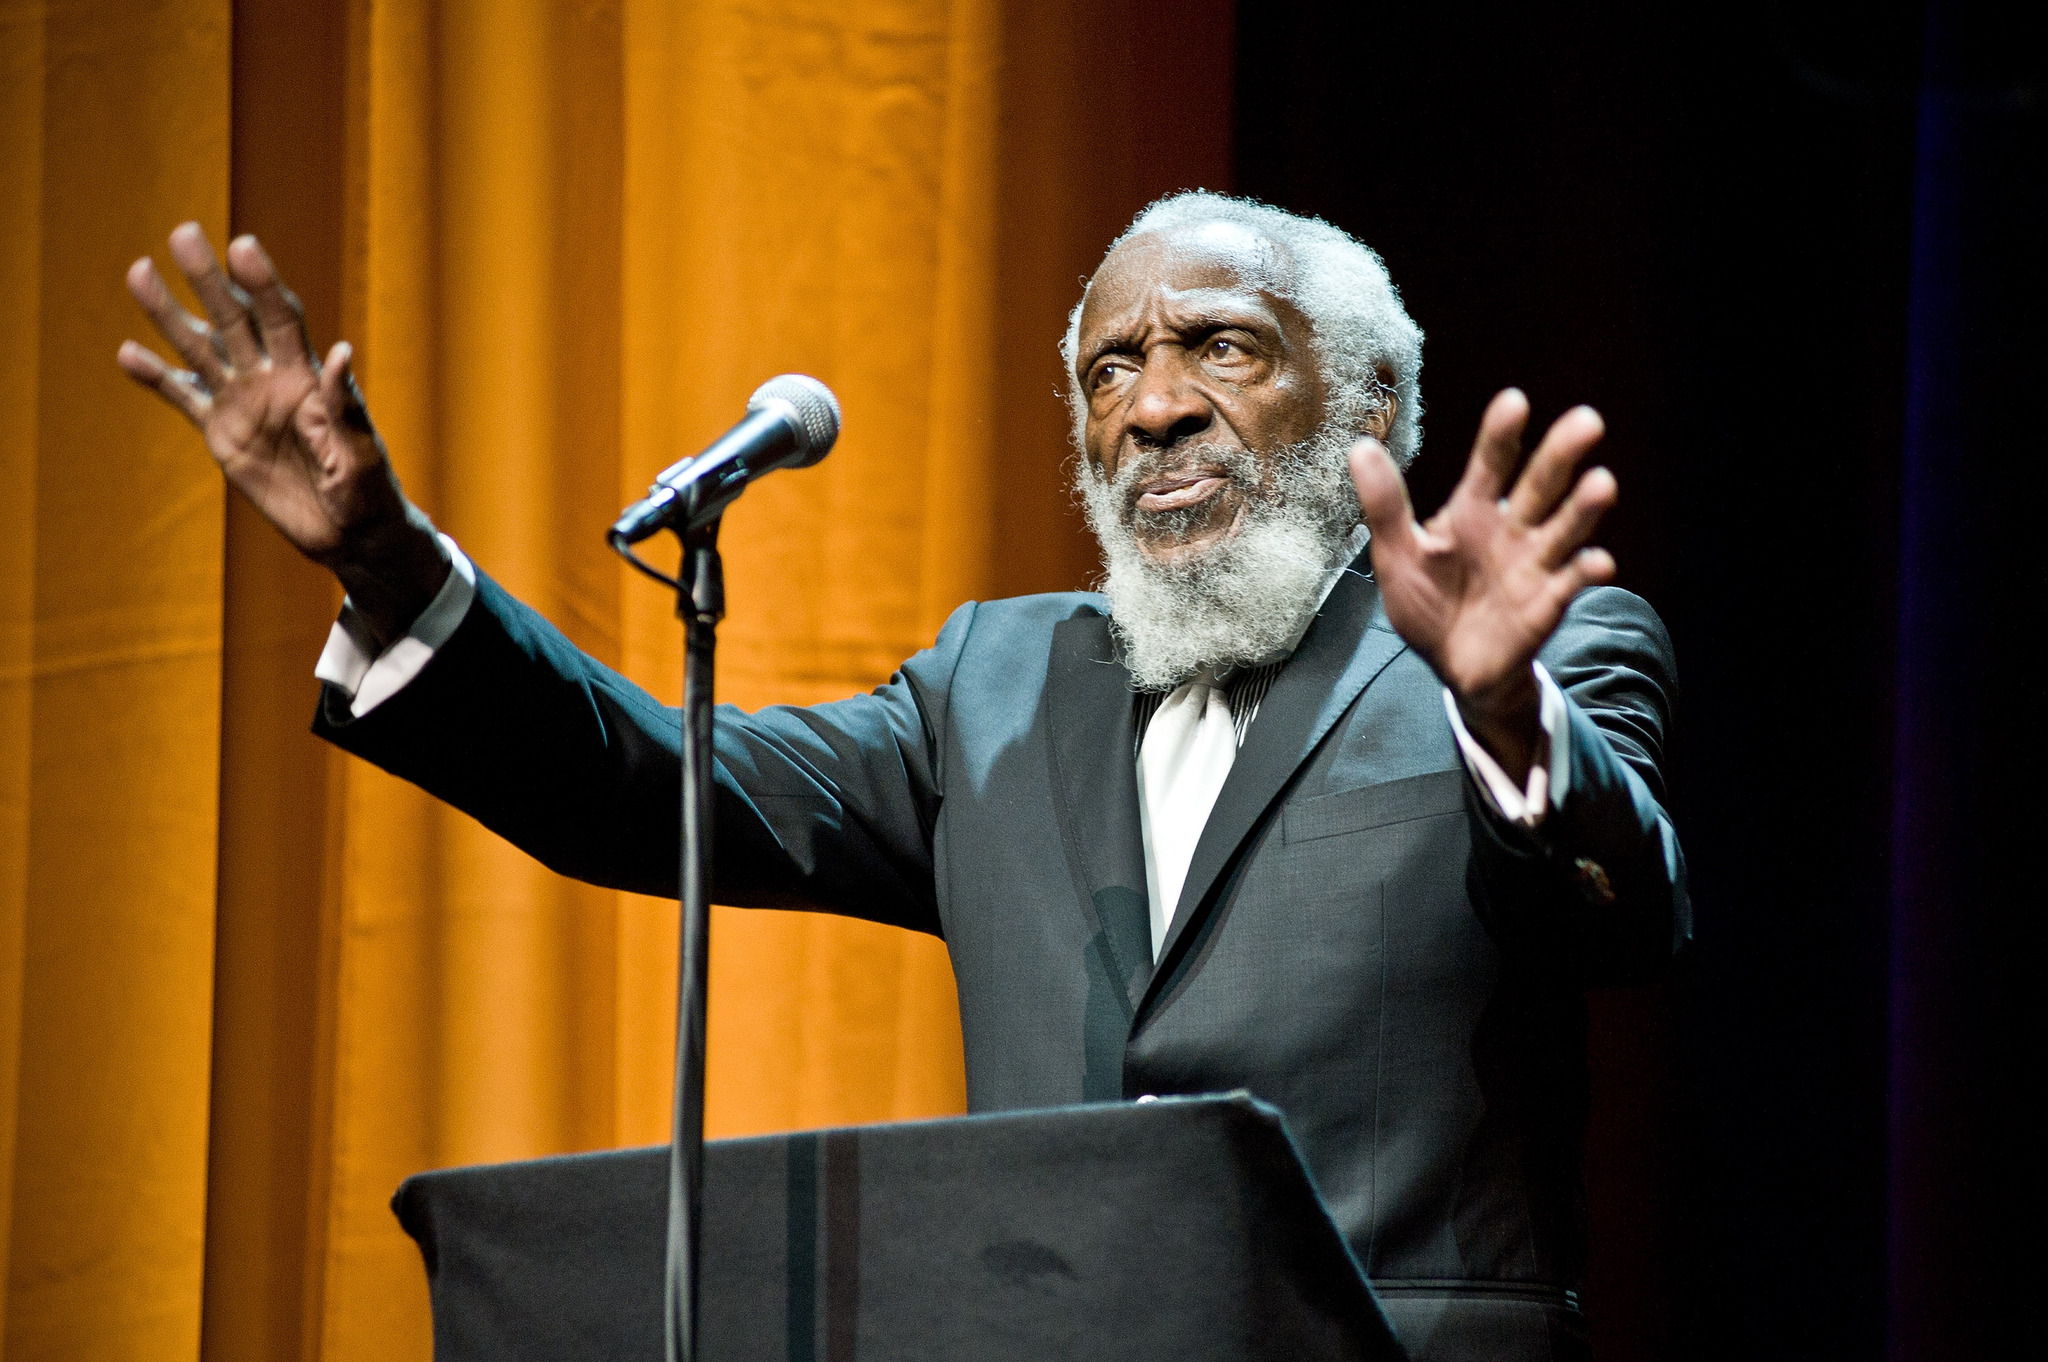 Dick Gregory attends the Roger Ebert Memorial Tribute at Chicago Theatre on April 11, 2013 in Chicago, Illinois.